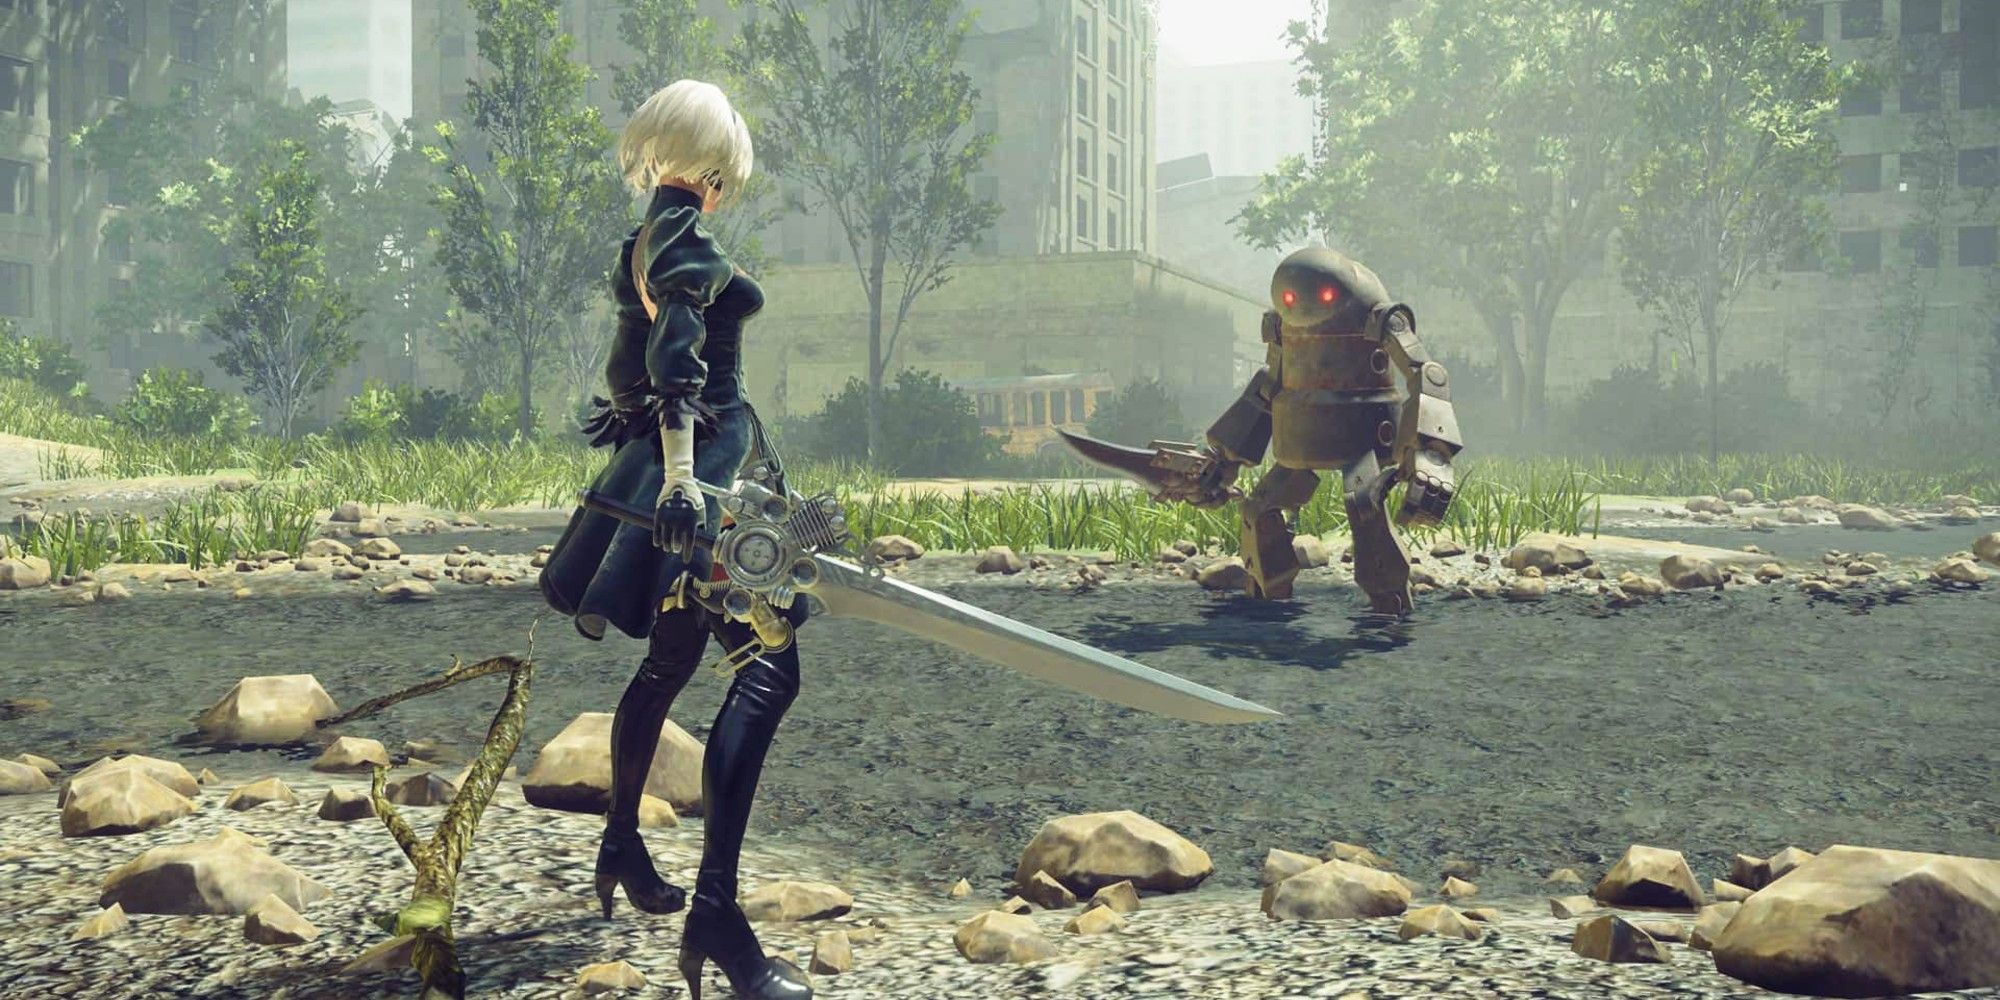 2B faces a Machine Life Form in Nier: Automata.